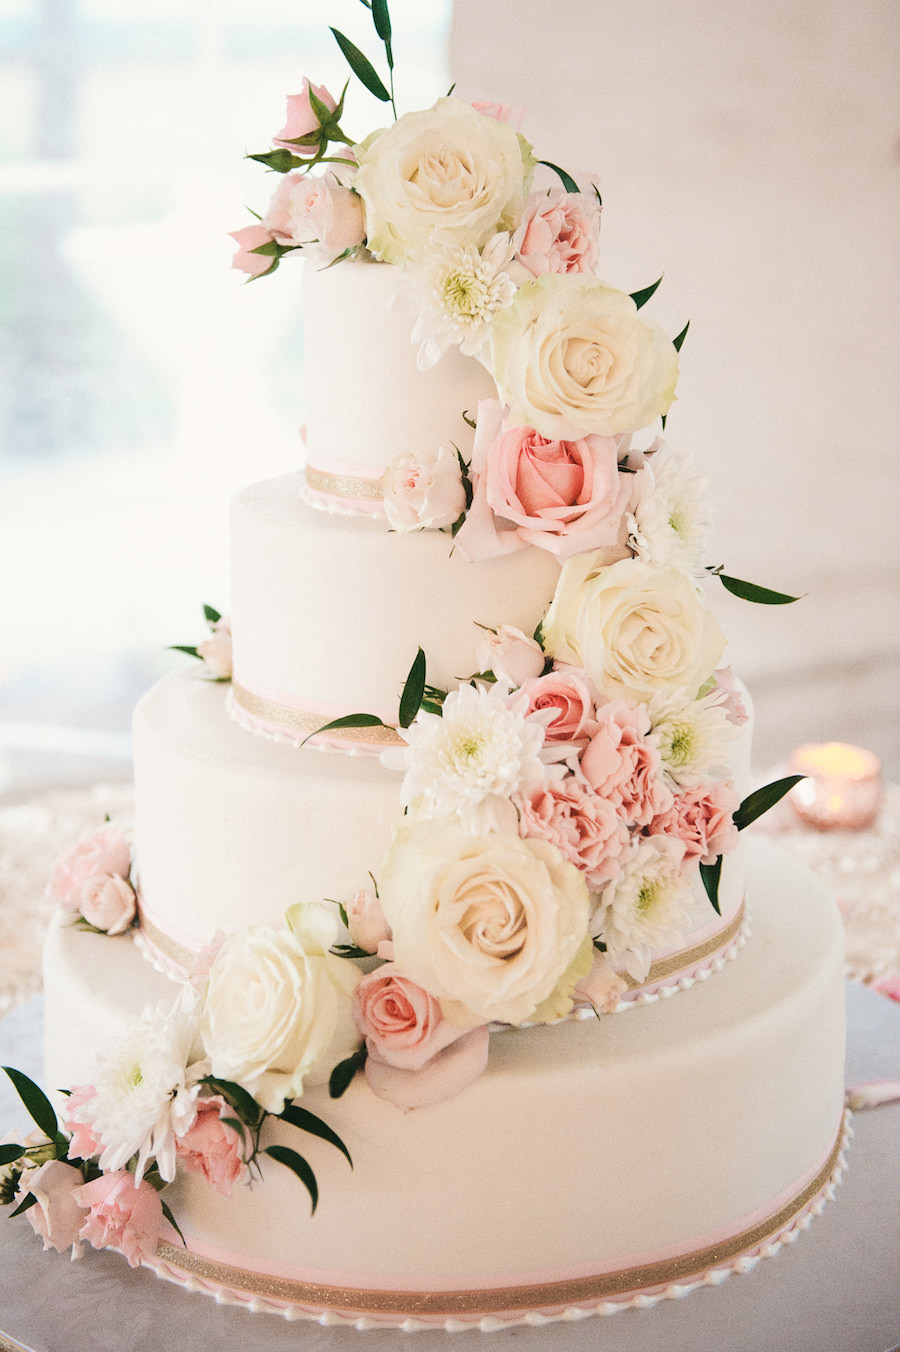 Four Tier Round White and Blush Pink Wedding Cake with Fresh Flower Roses and Pearl Decoration on Specialty Linen